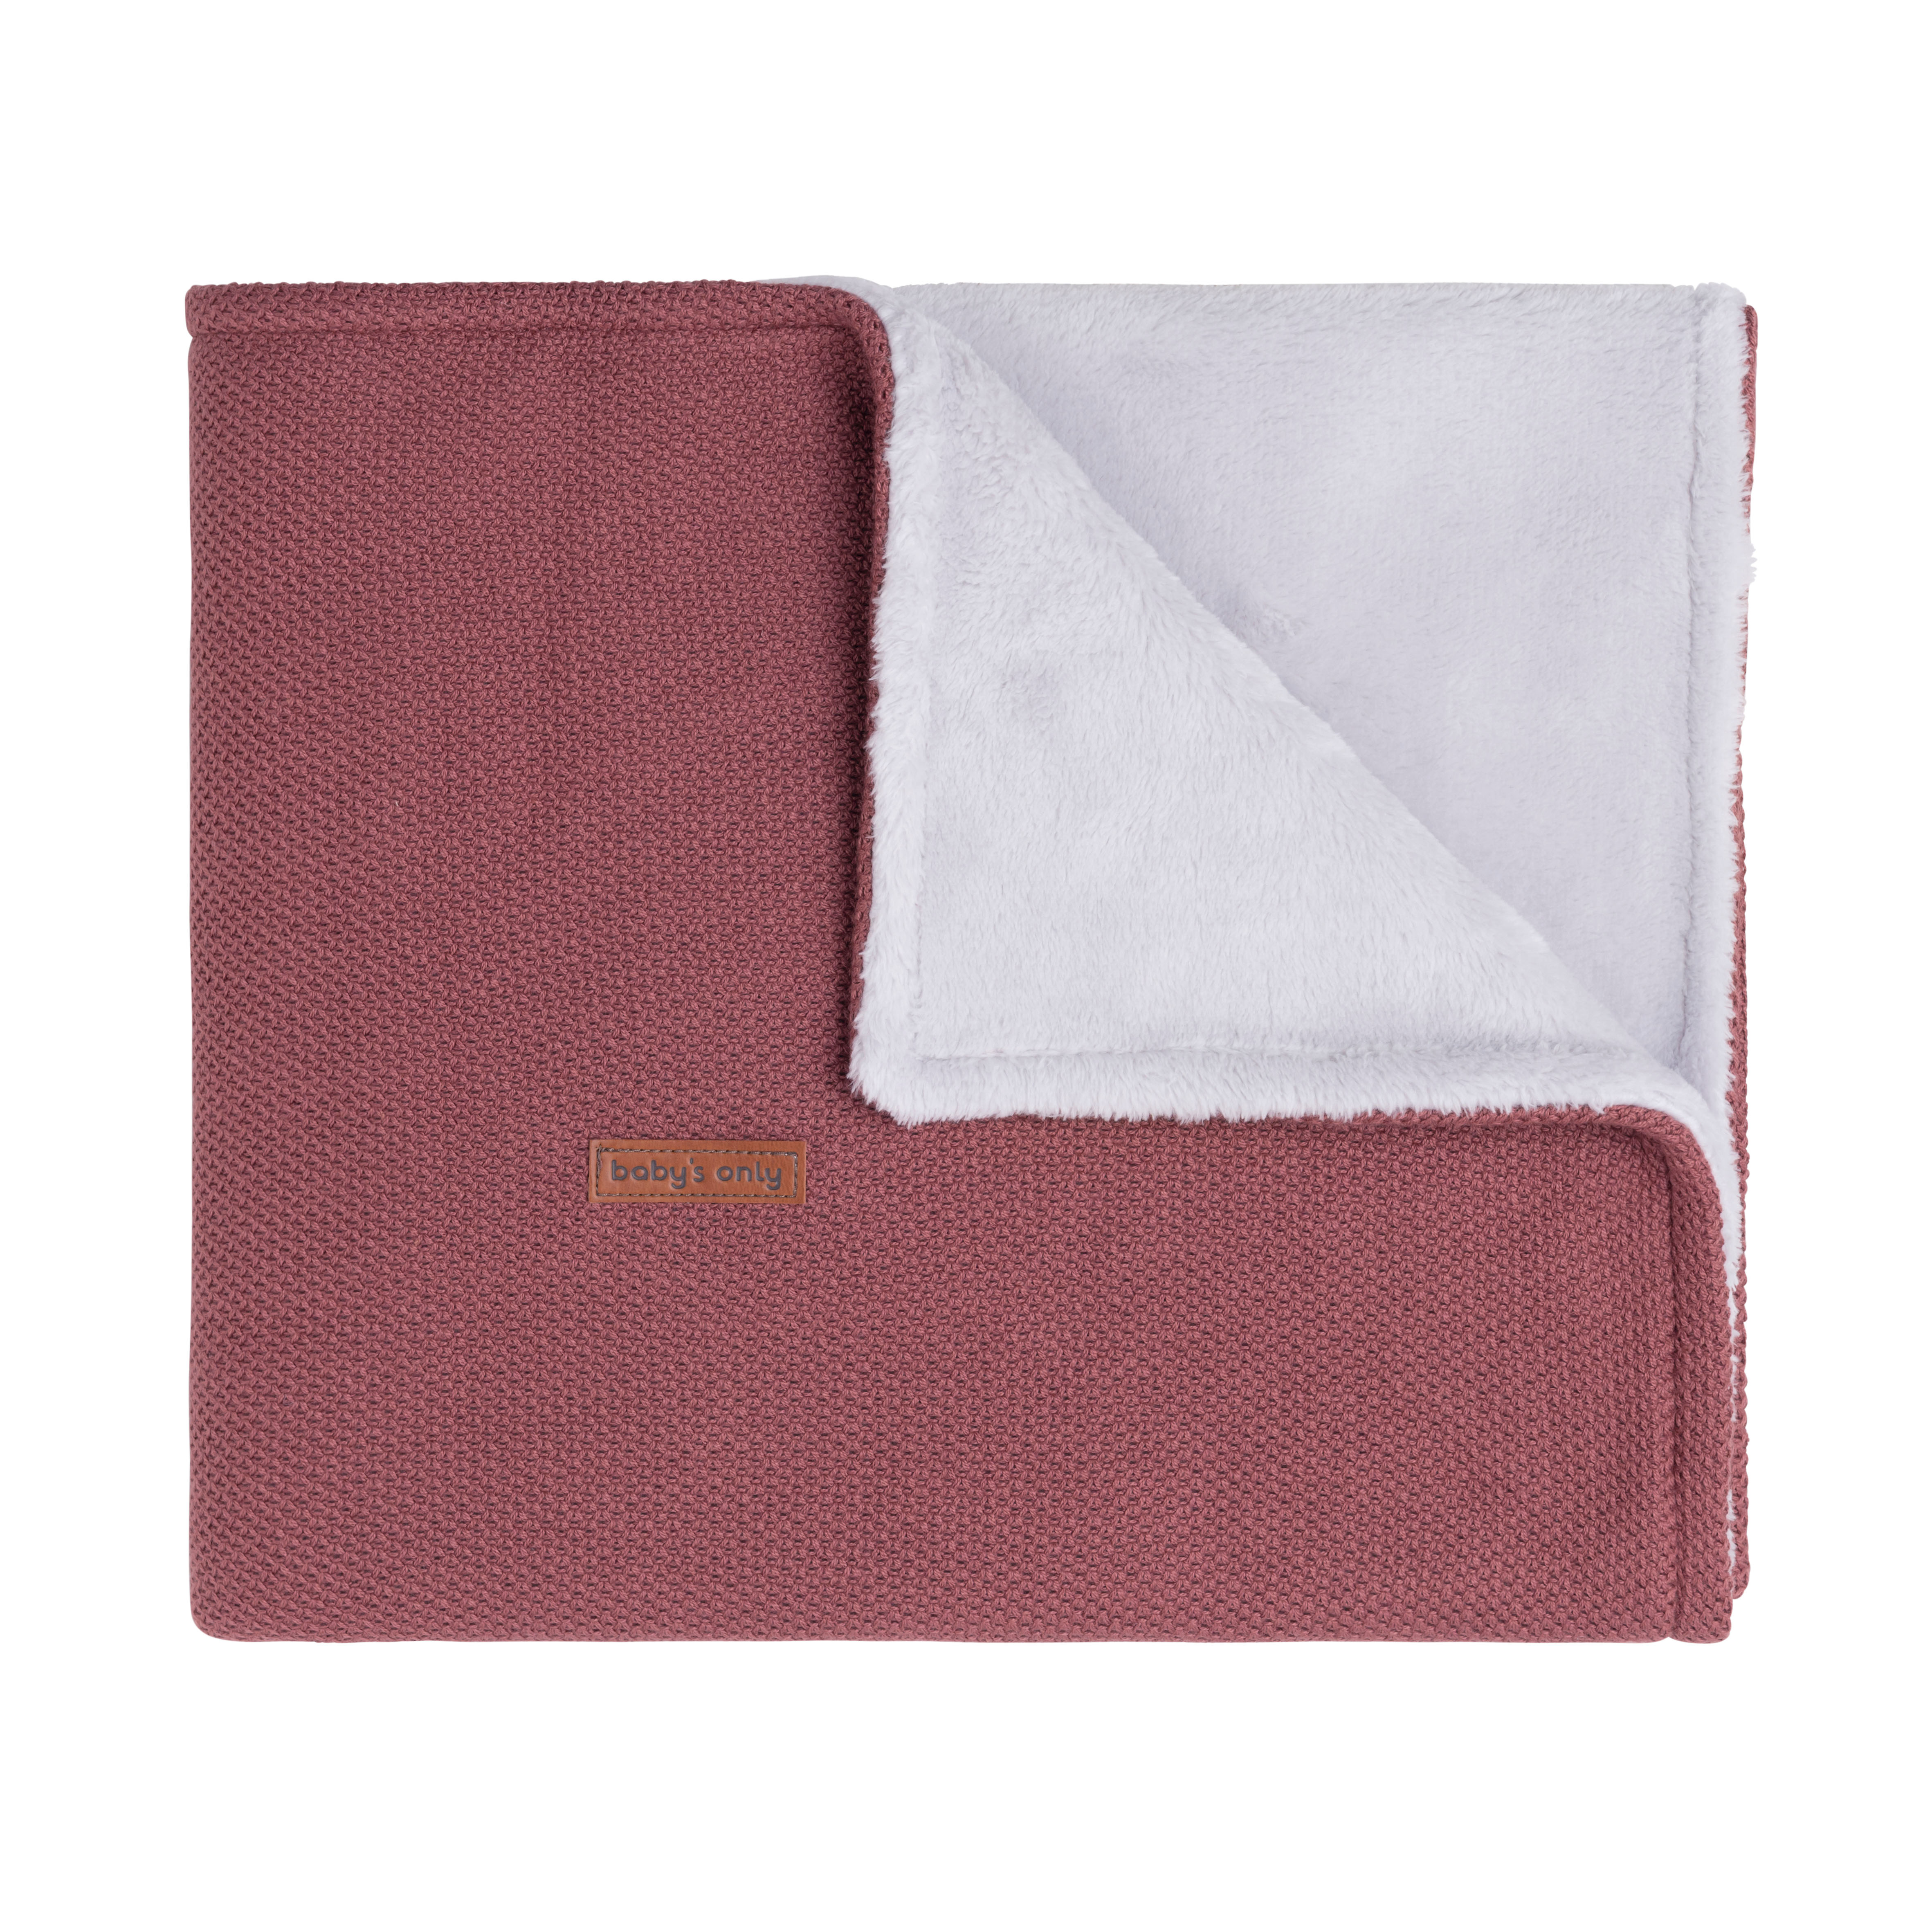 Cot blanket teddy Classic stone red